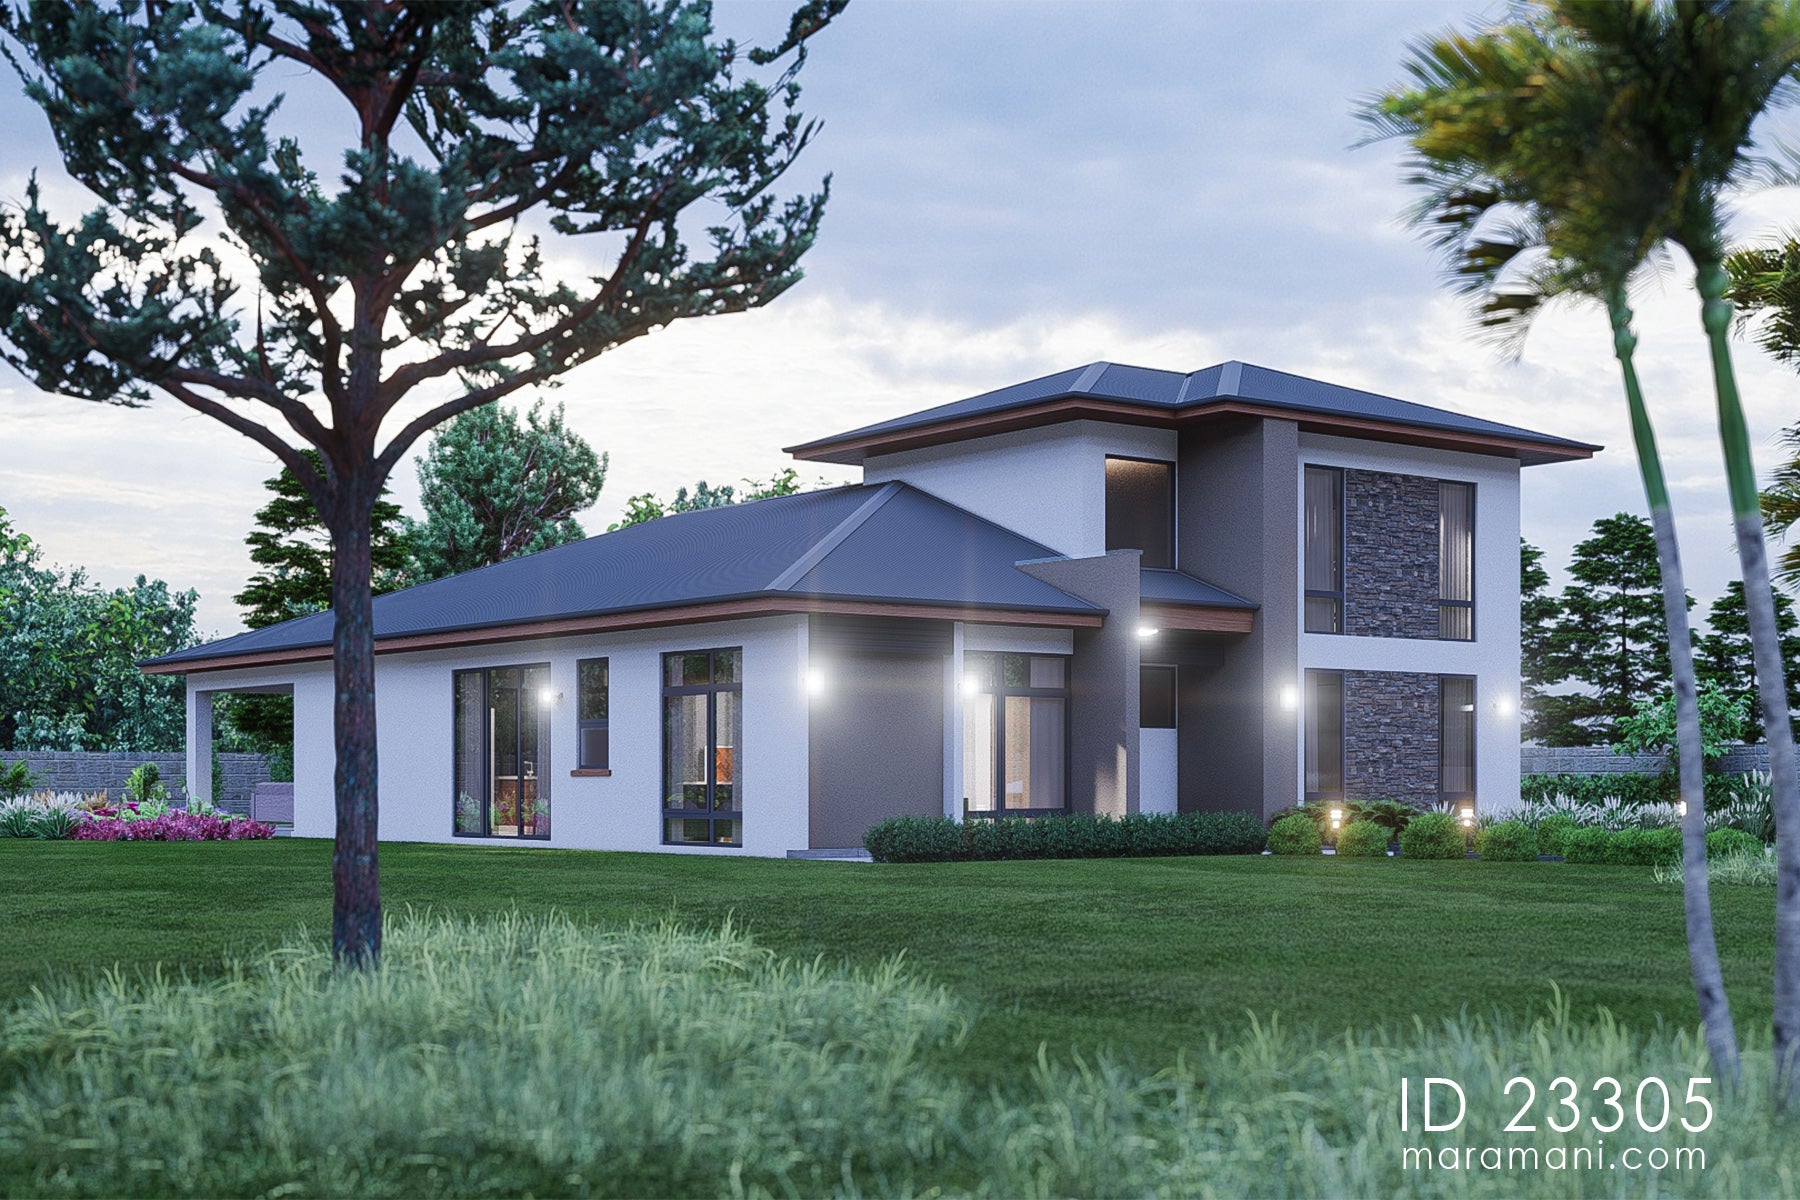 Contemporary 3 Bedroom House Plan - ID 23305